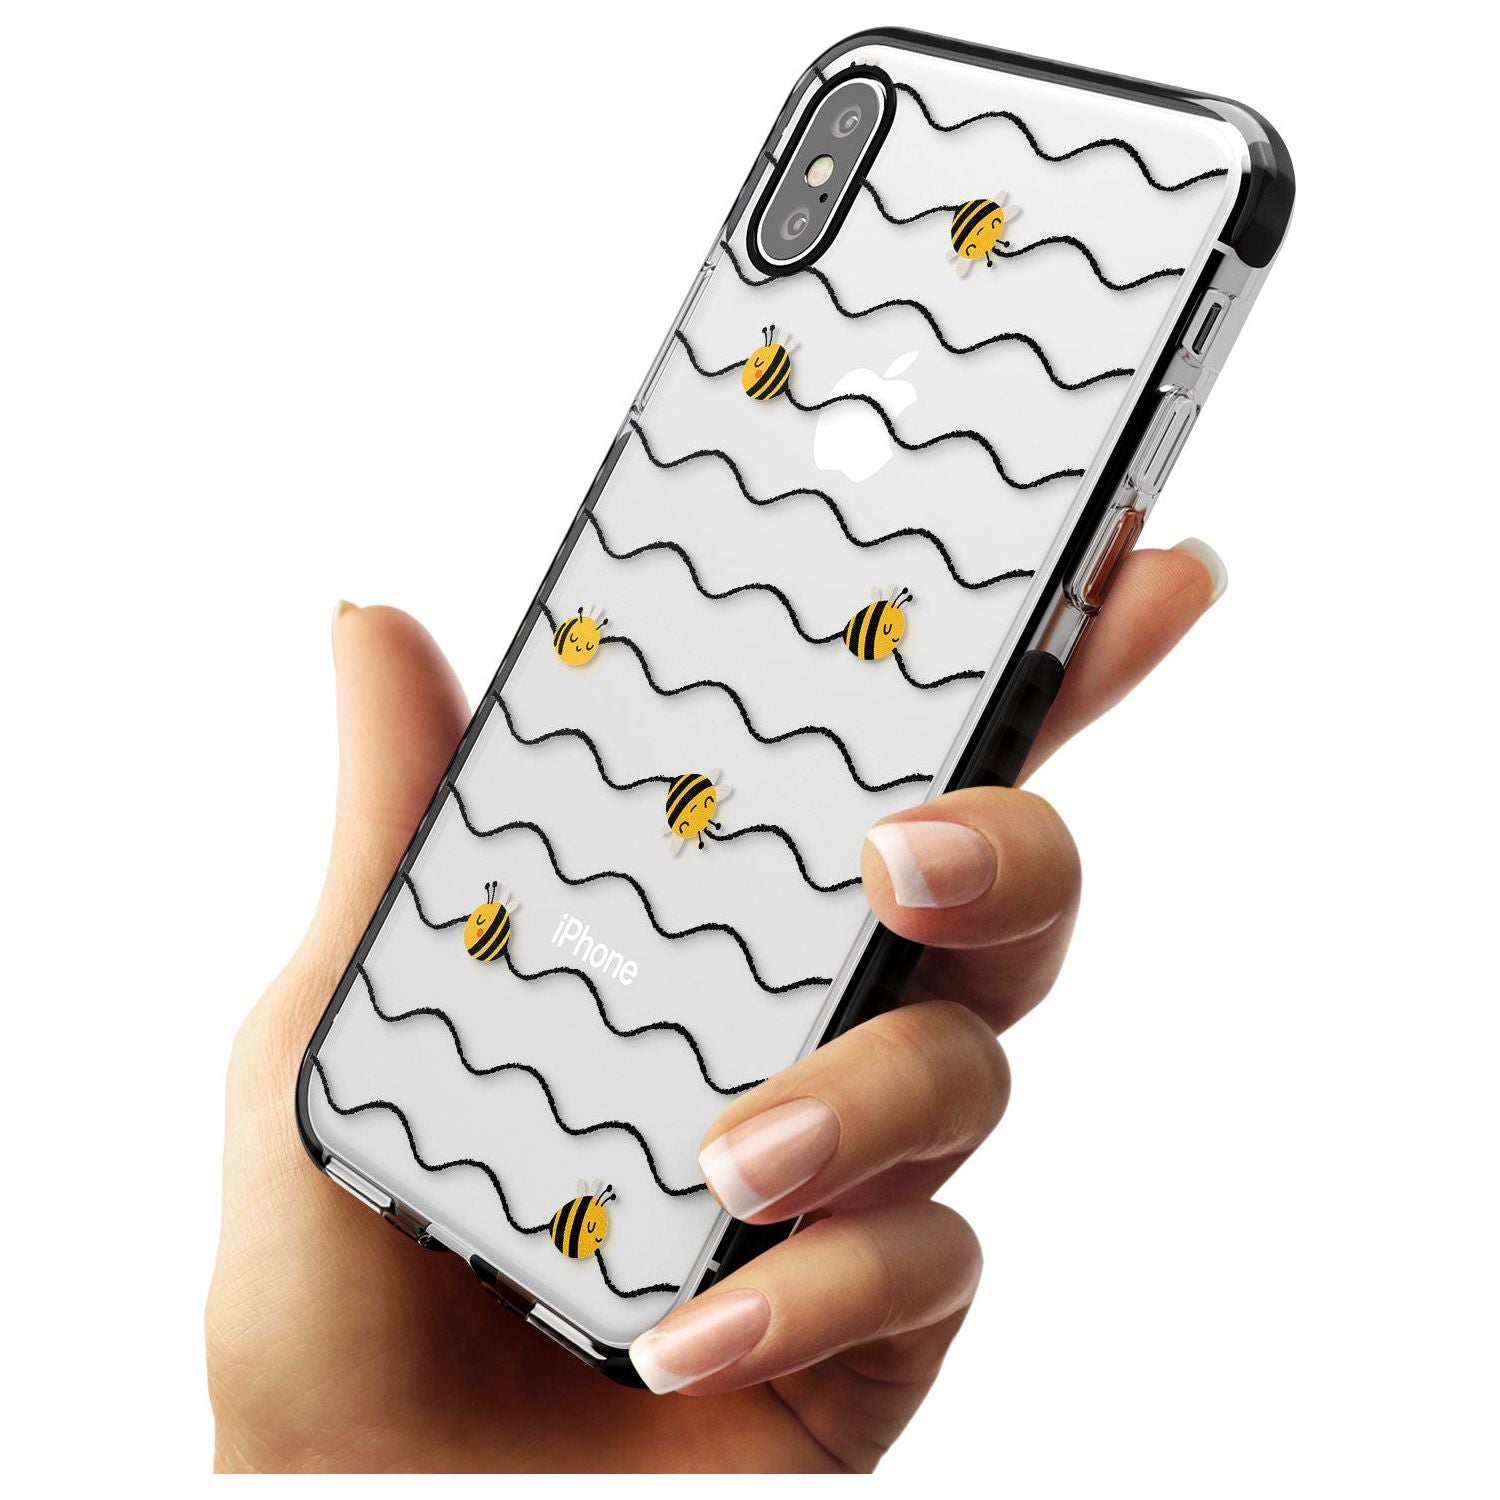 Sweet as Honey Patterns: Bees & Stripes (Clear) Black Impact Phone Case for iPhone X XS Max XR